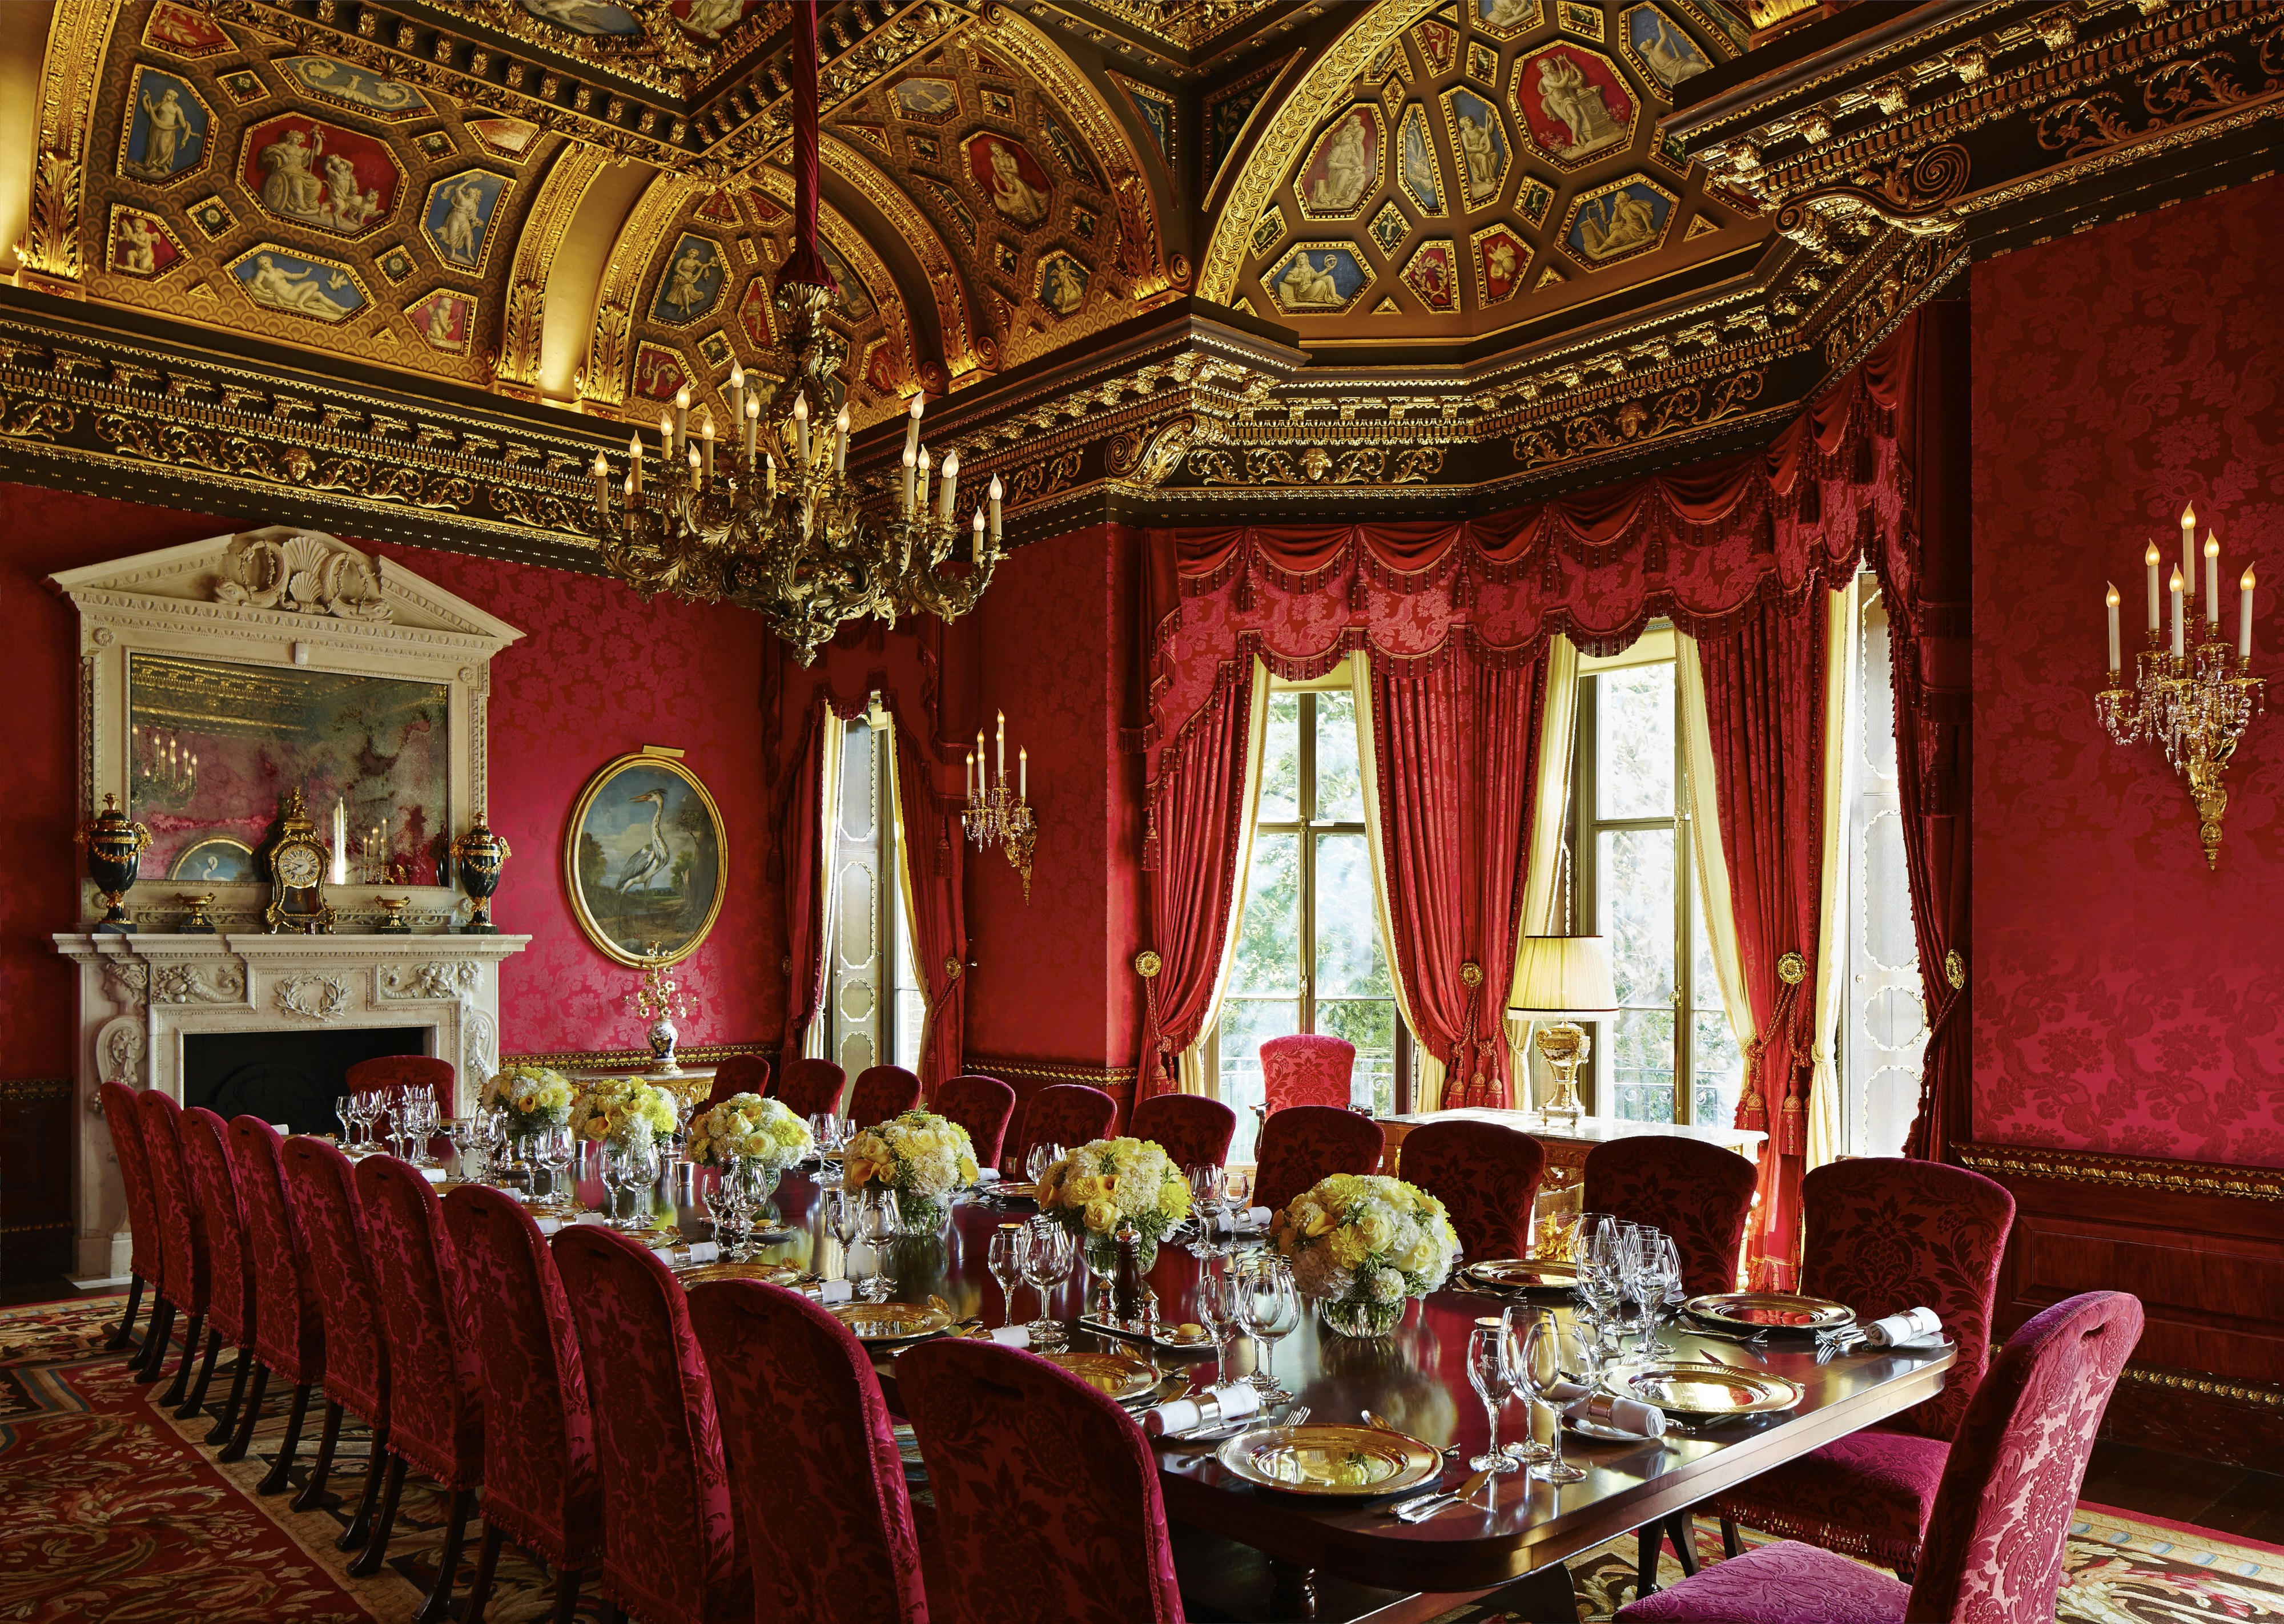 The Ritz London - The William Kent Room image 2